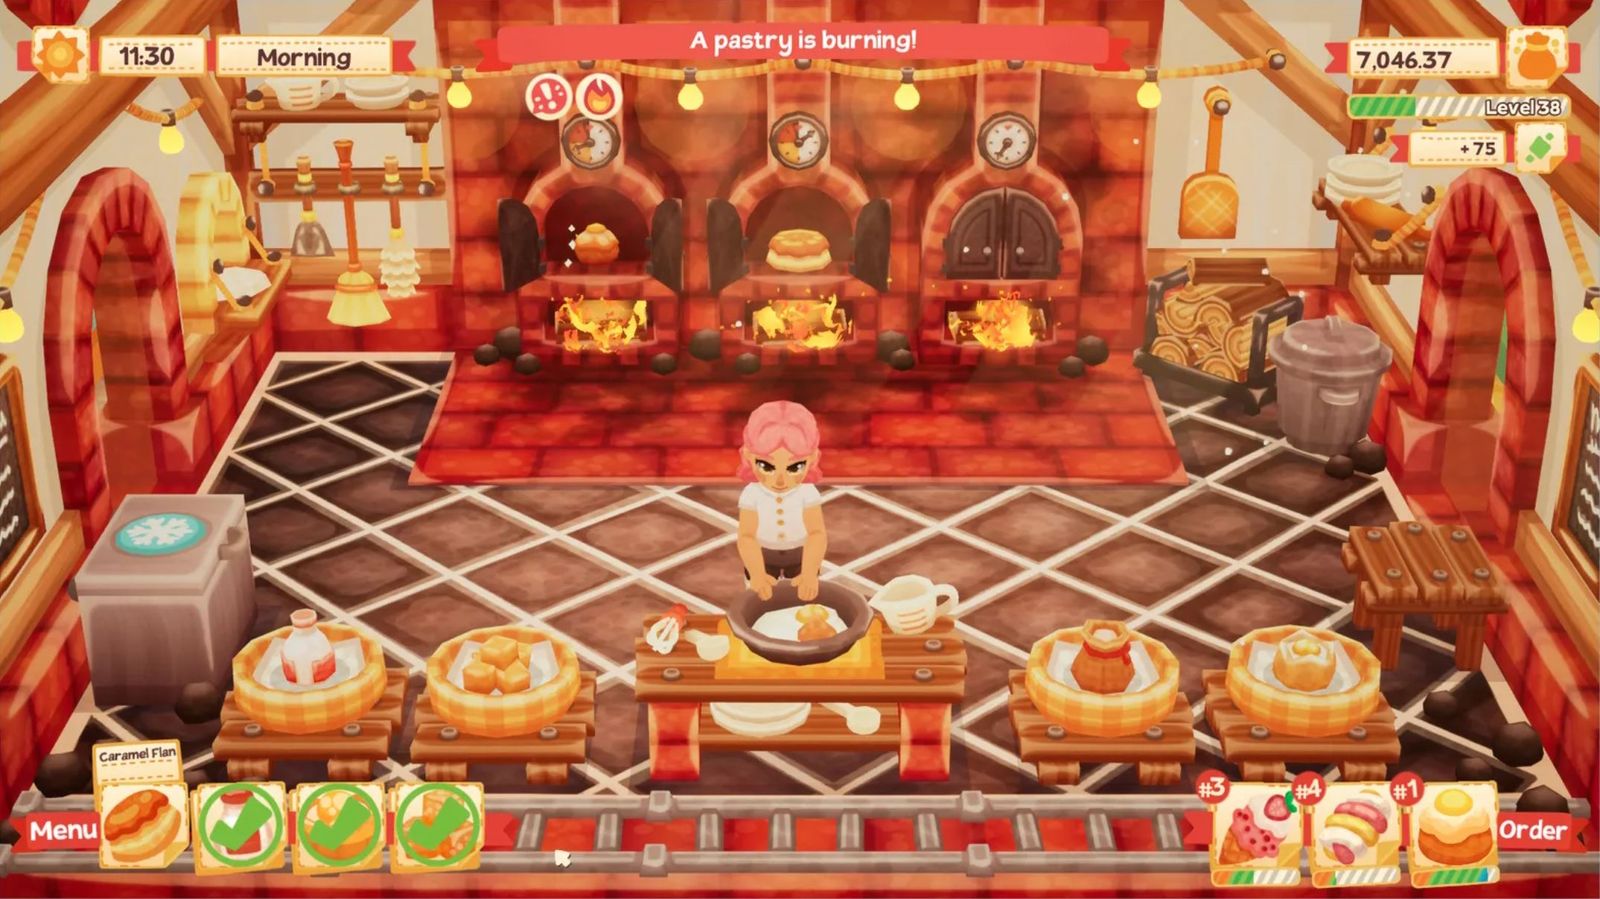 A player character is in the kitchen in Lemon Cake making pastrys while food is in the ovens behind her